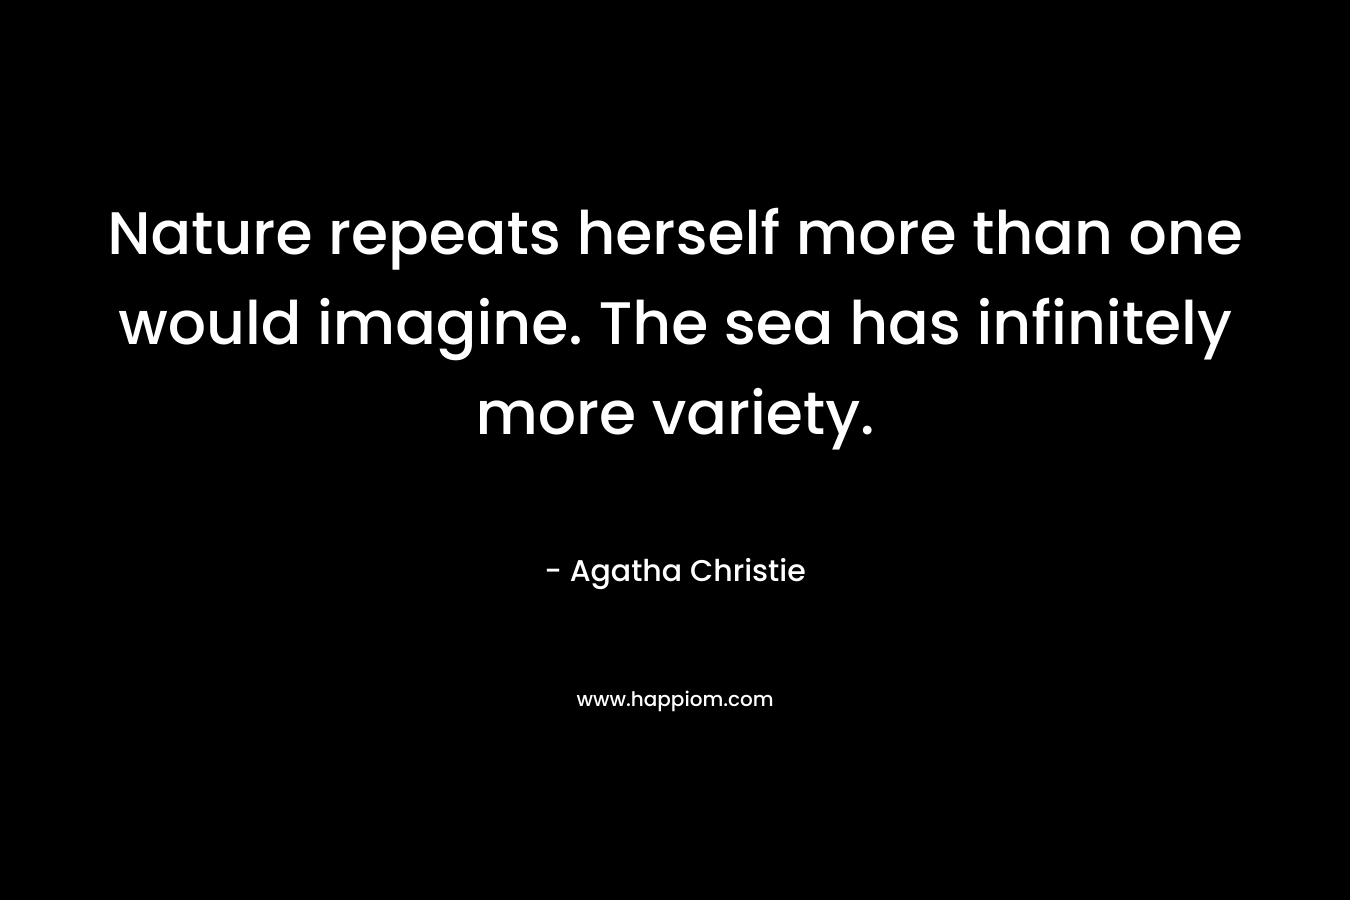 Nature repeats herself more than one would imagine. The sea has infinitely more variety.